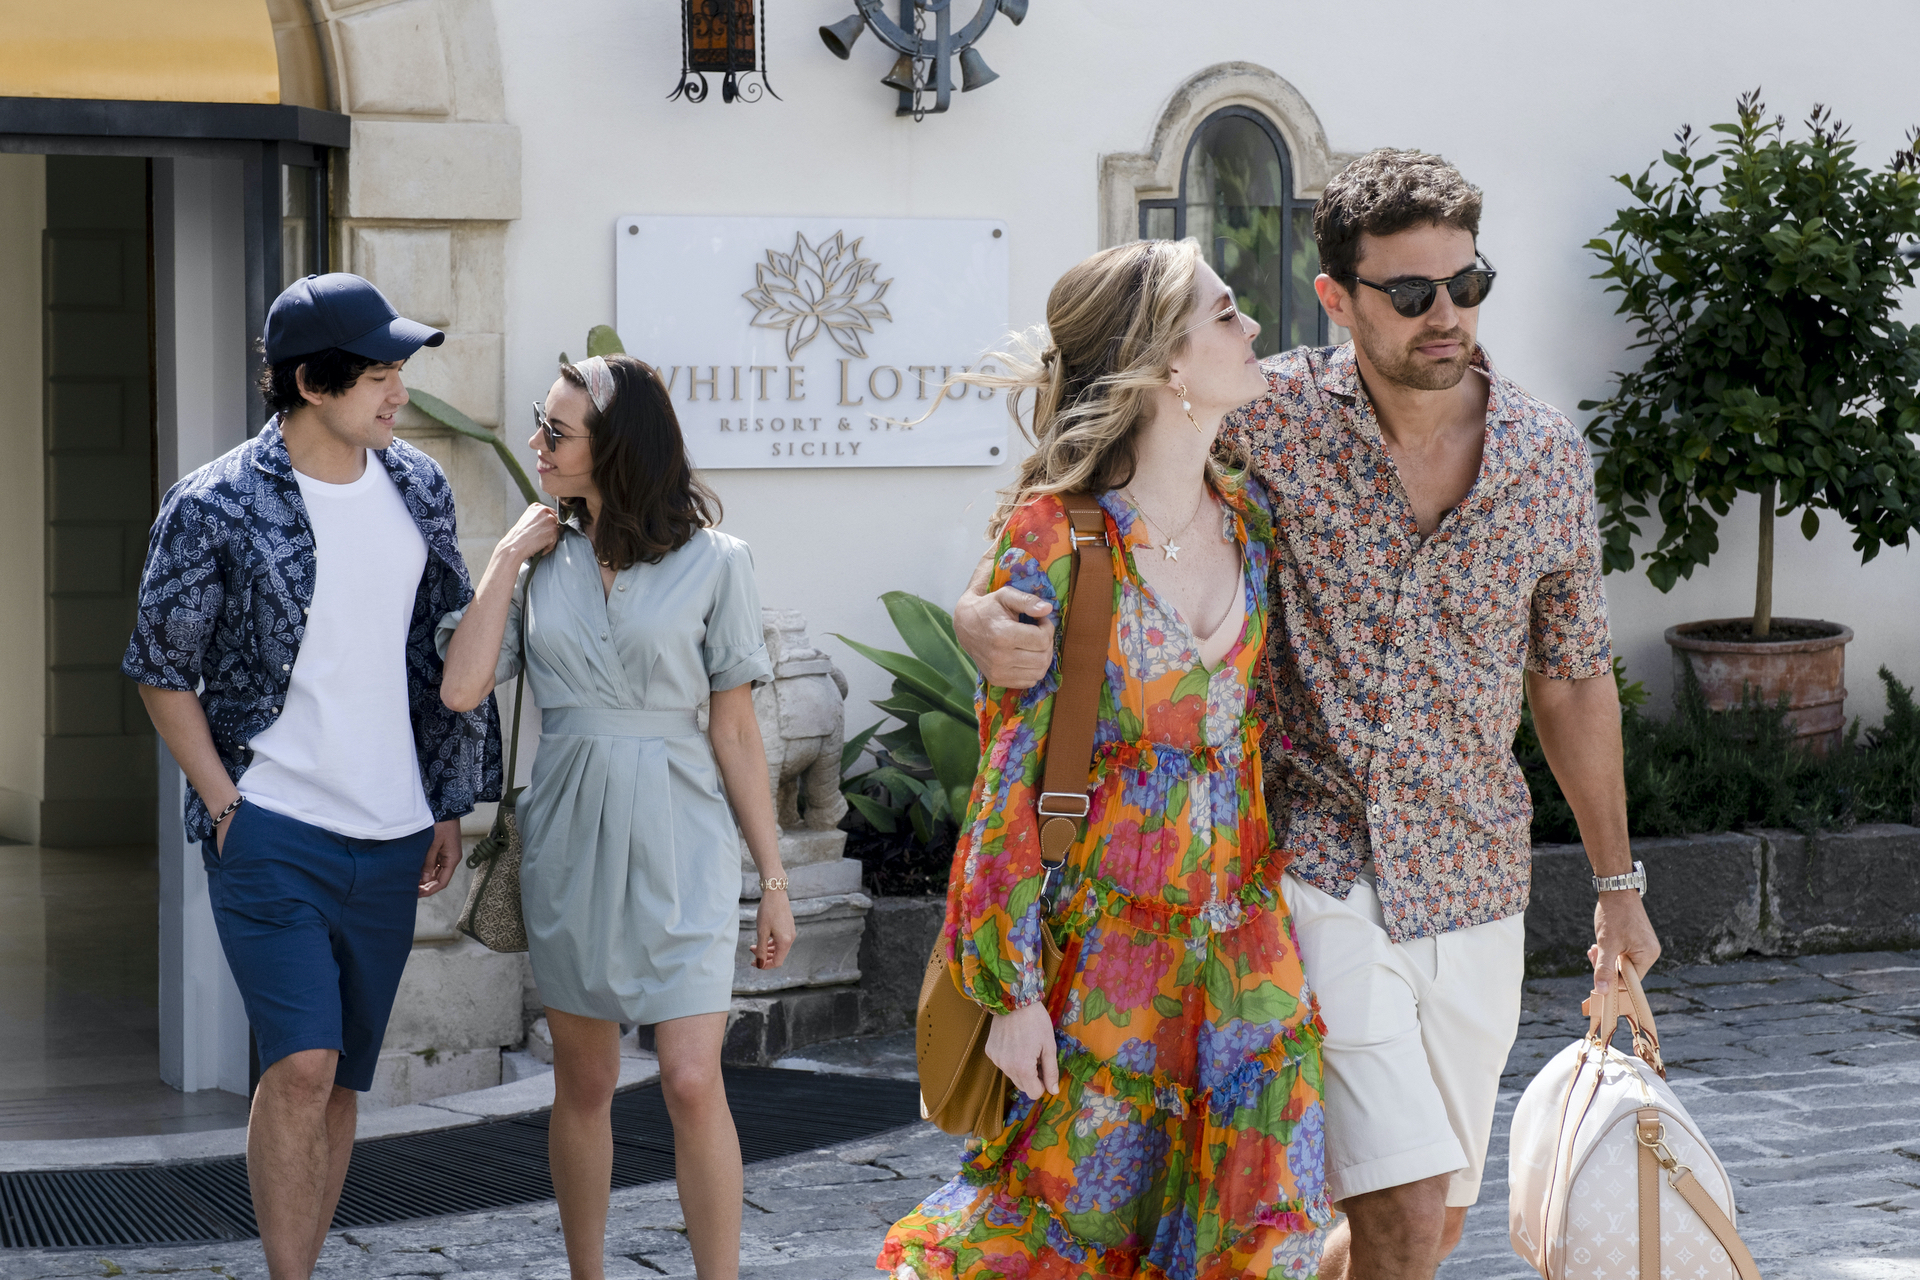 The highly anticipated trailer for Mike White's dark comedy, The White Lotus, is here. The series is switching gears, leaving Hawaii behind in Season 1 and vacationing in Sicily this upcoming season.